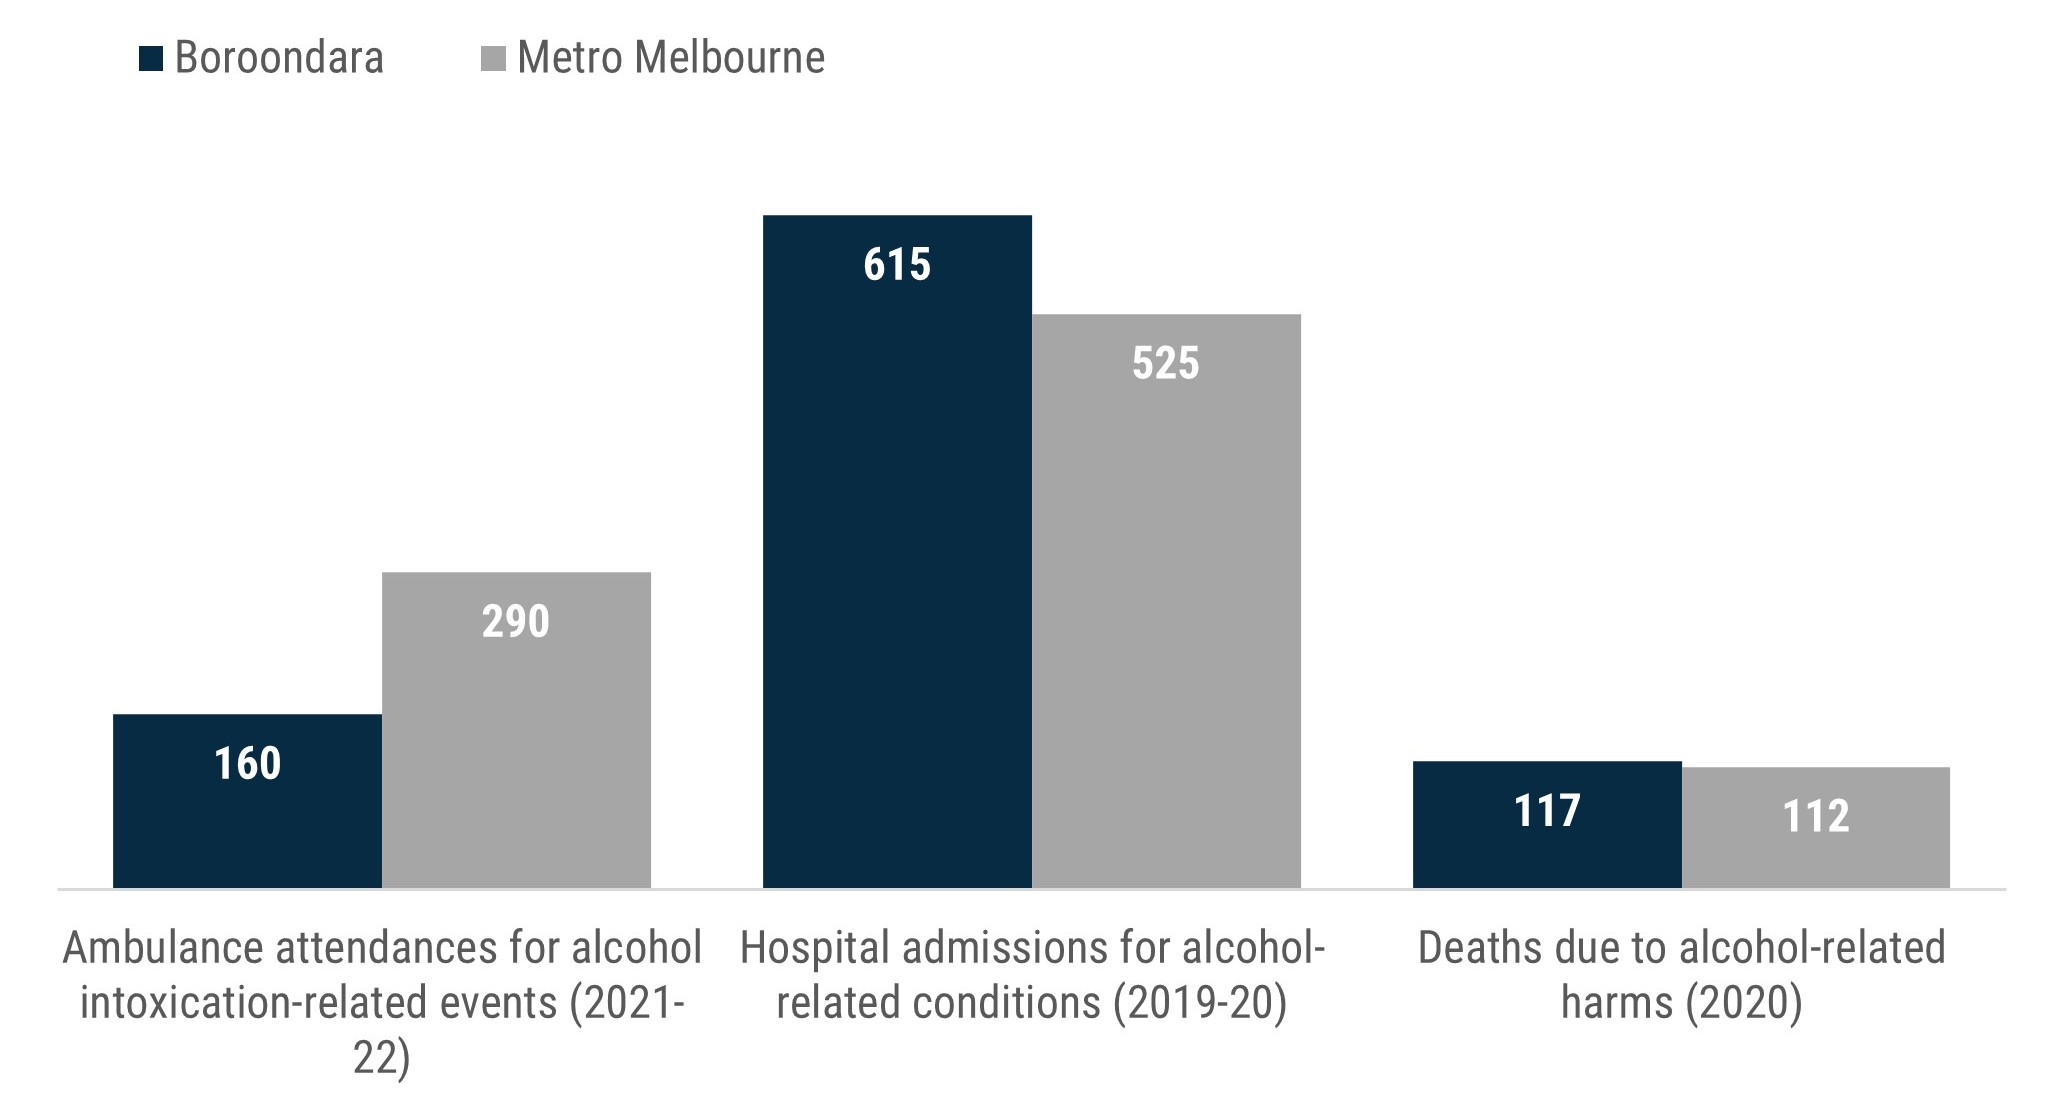 Column chart which shows that while ambulance attendances to Boroondara locations are lower per 100,000 than across metropolitan Melbourne (201 relative to 360), Boroondara residents are more likely to be admitted to hospital (615 compared to 525) or to die from alcohol-related causes (117 compared to 112) than residents across metropolitan Melbourne.